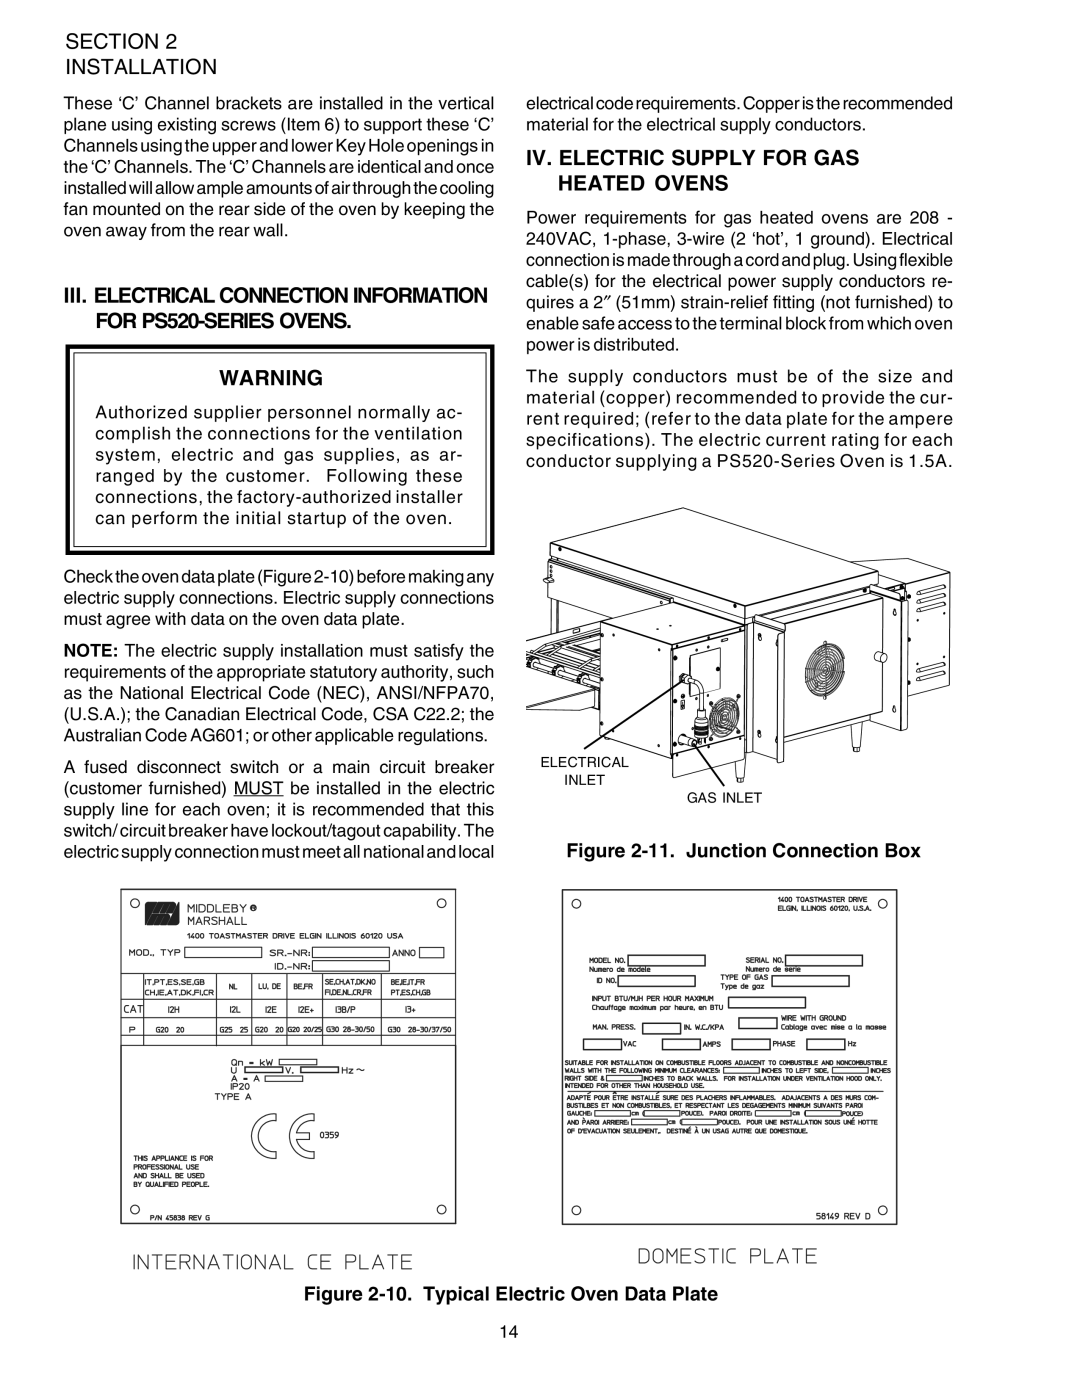 Middleby Marshall PS520G installation manual Iv. Electric Supply For Gas Heated Ovens, 11.Junction Connection Box 